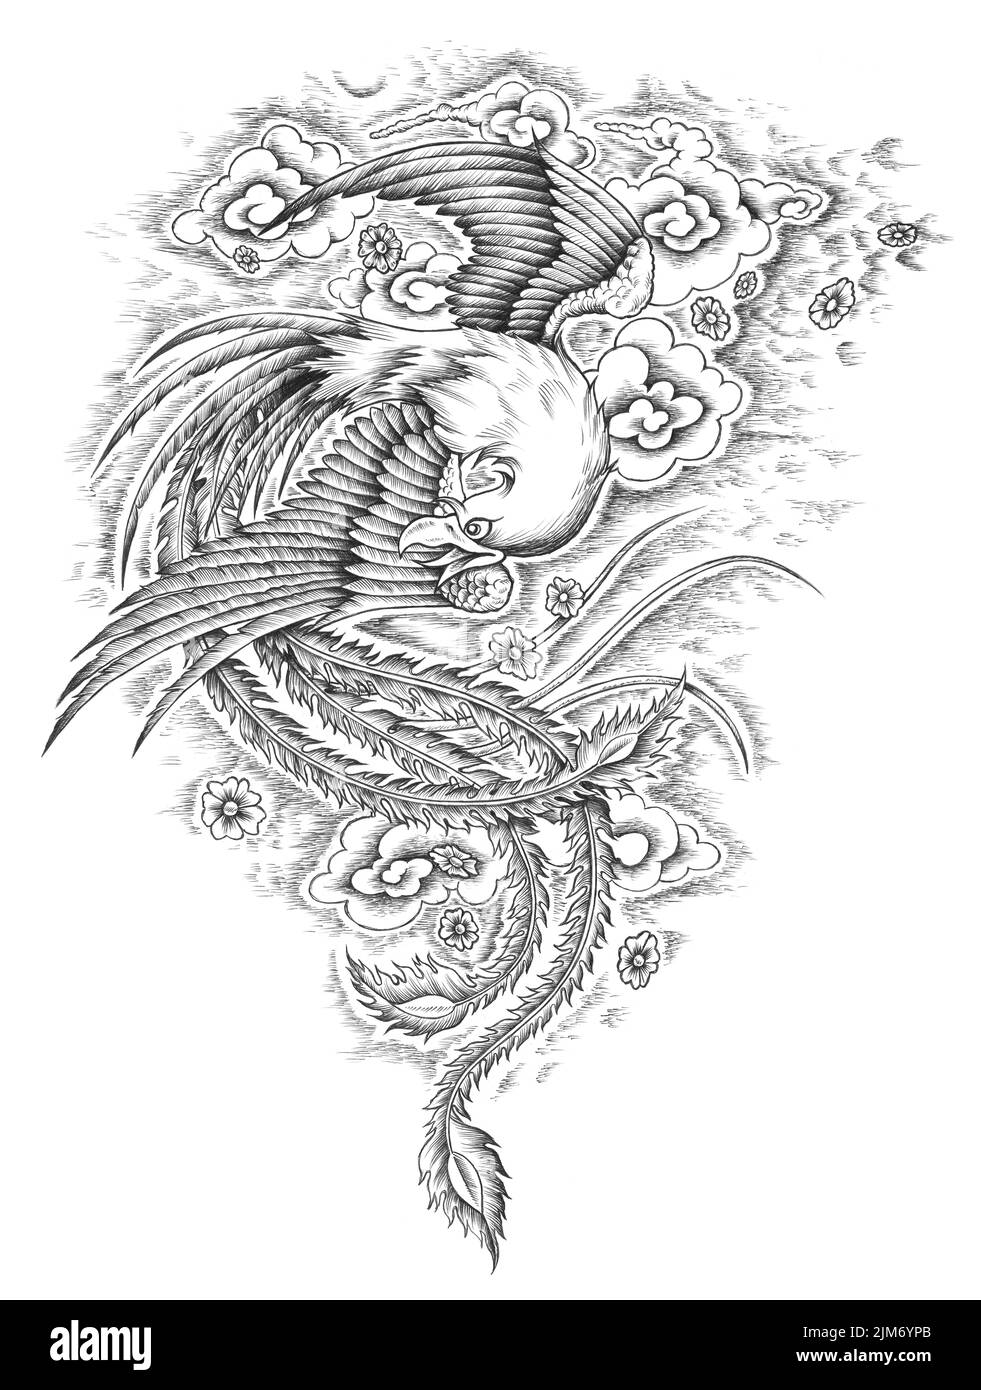 Indian style tattoo design of a Harpy eagle on Craiyon